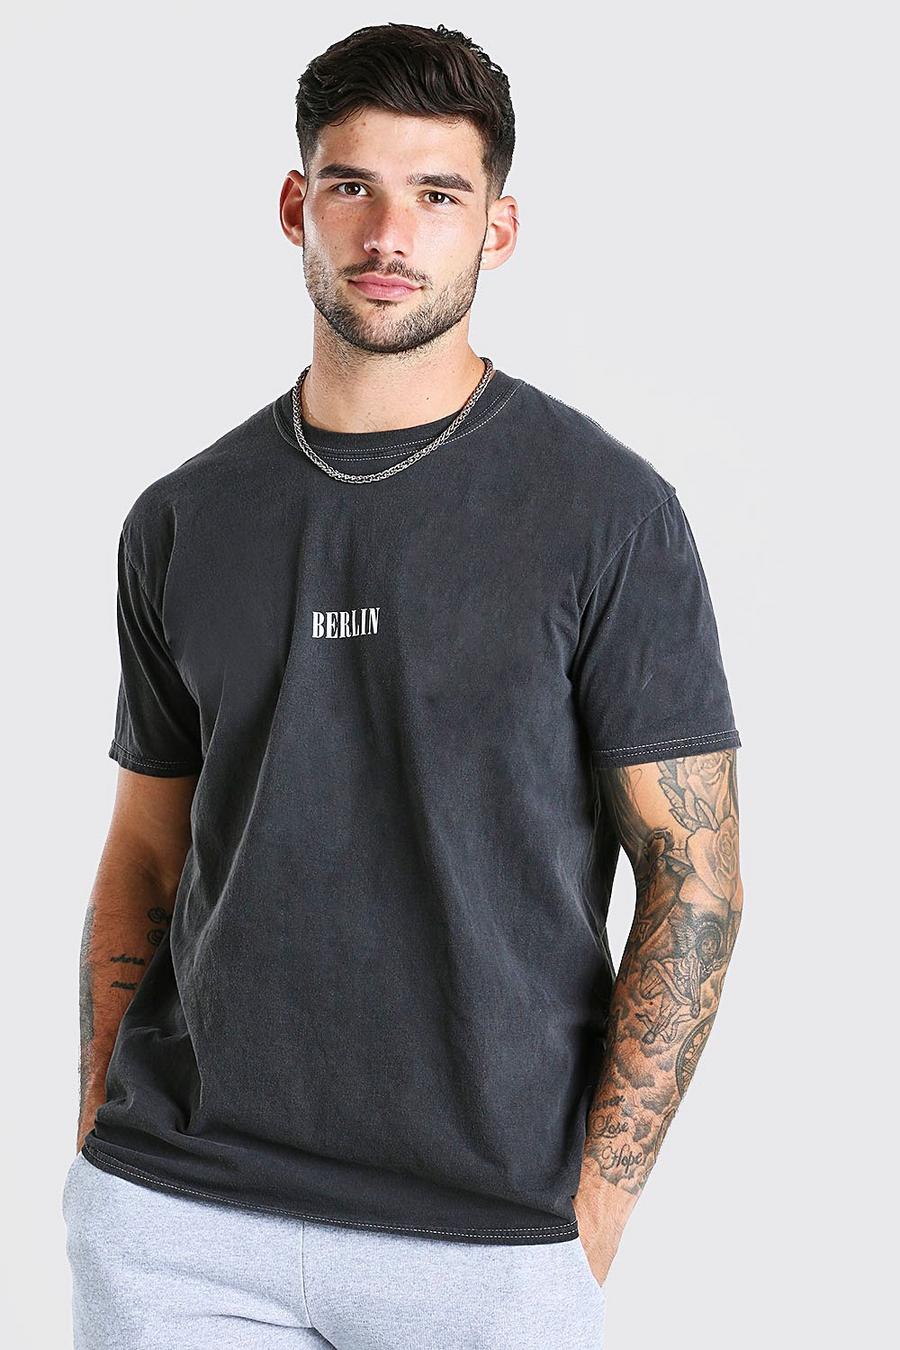 Charcoal Oversized Overdyed Berlin T-Shirt image number 1